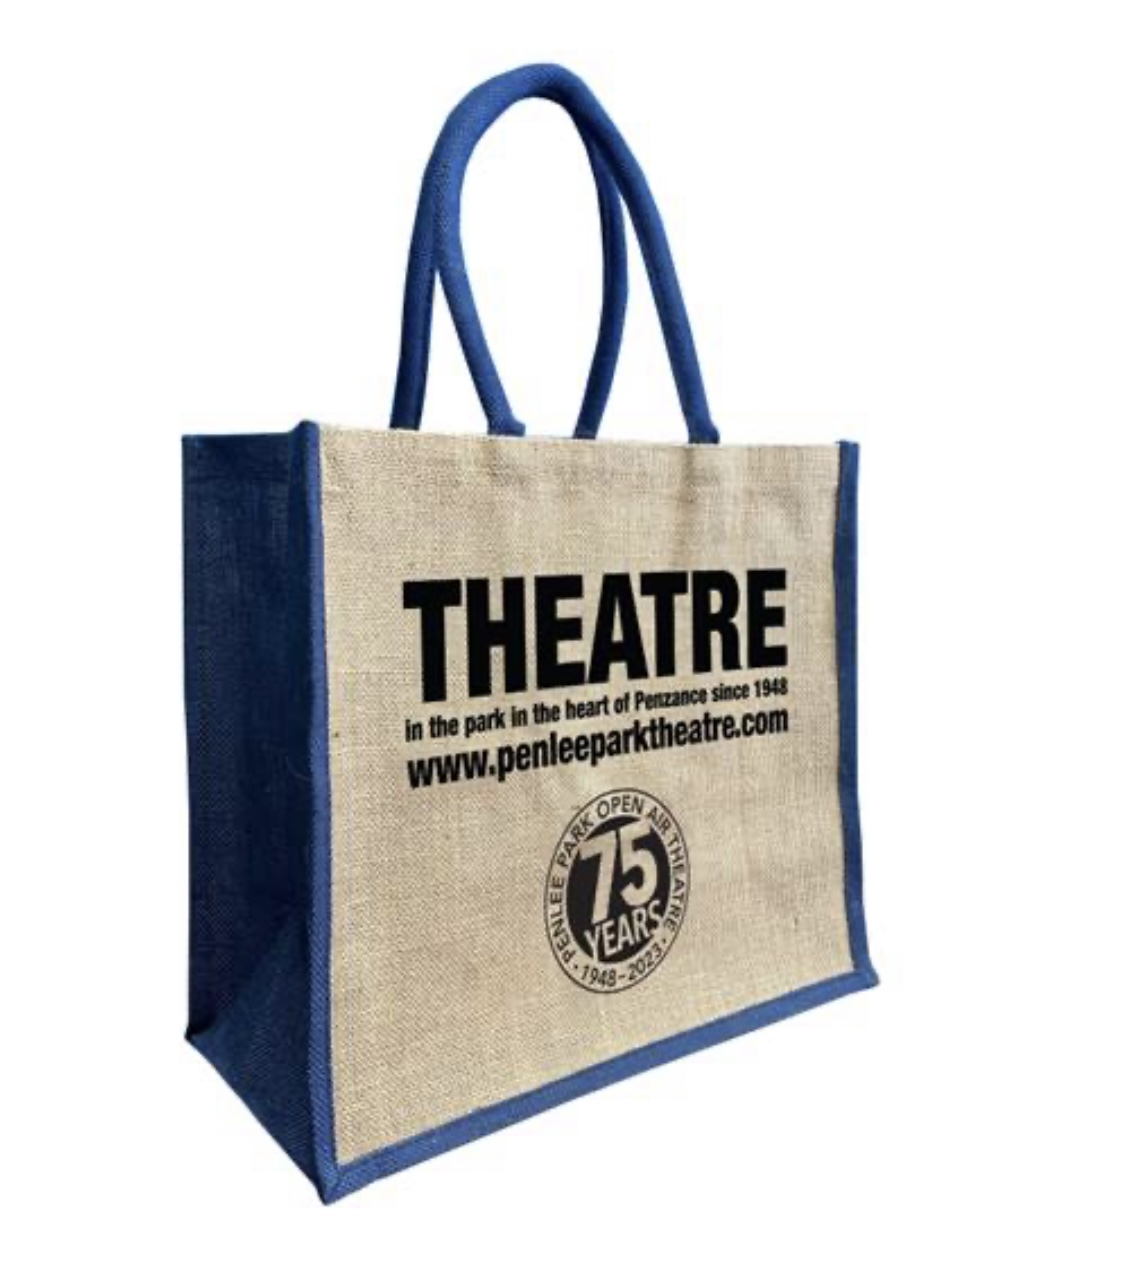 The Penlee Park theatre jute bag on a plain white background.